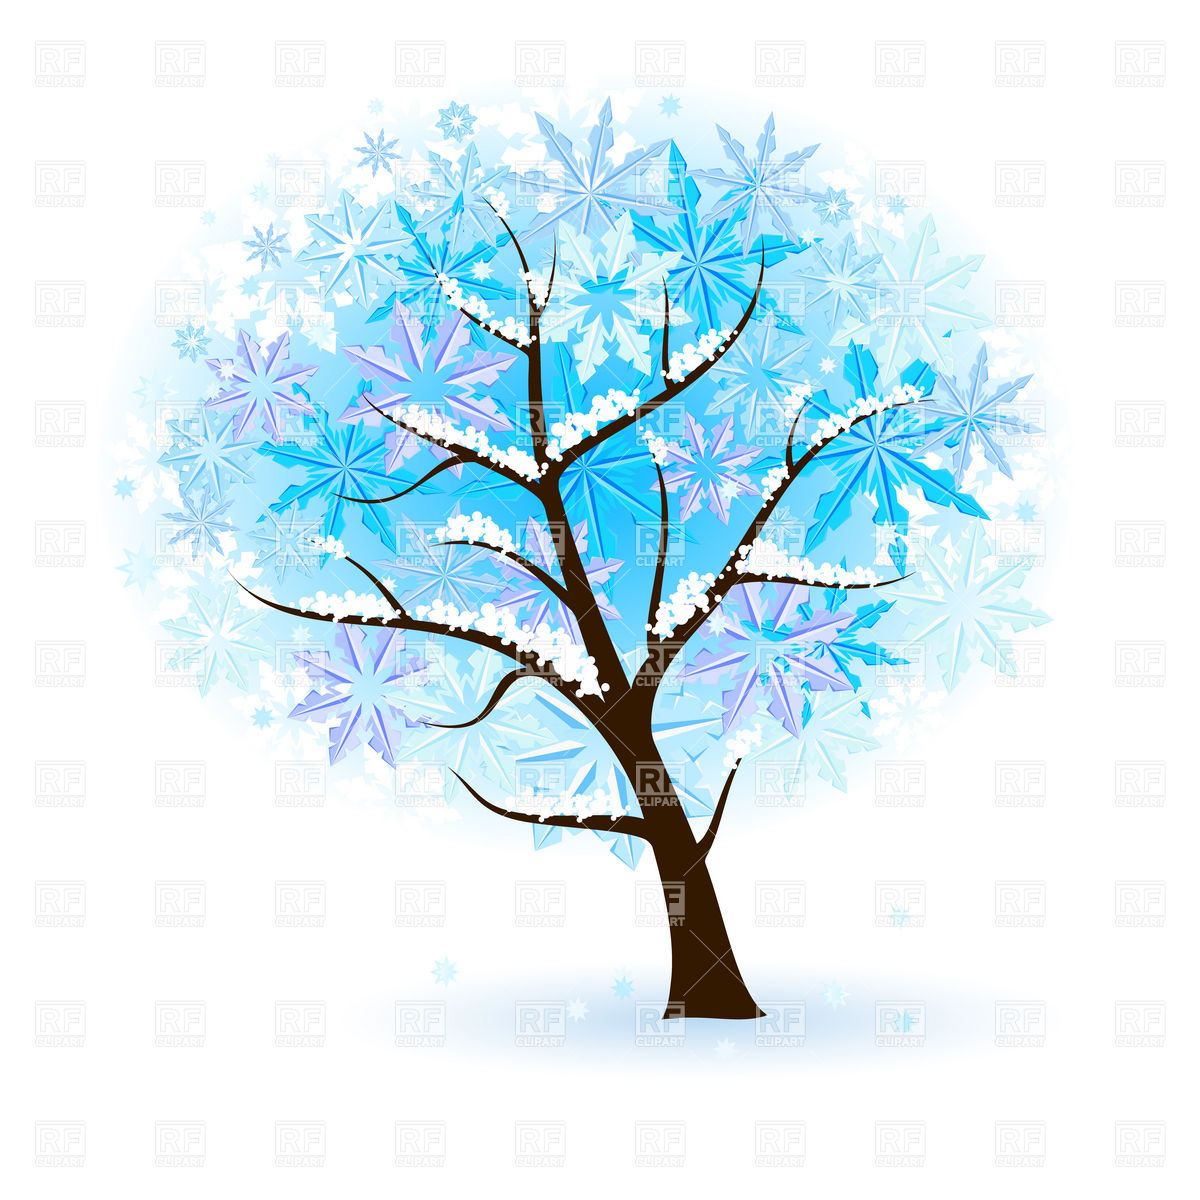 Stylized Winter Tree Download Royalty Free Vector Clipart  Eps